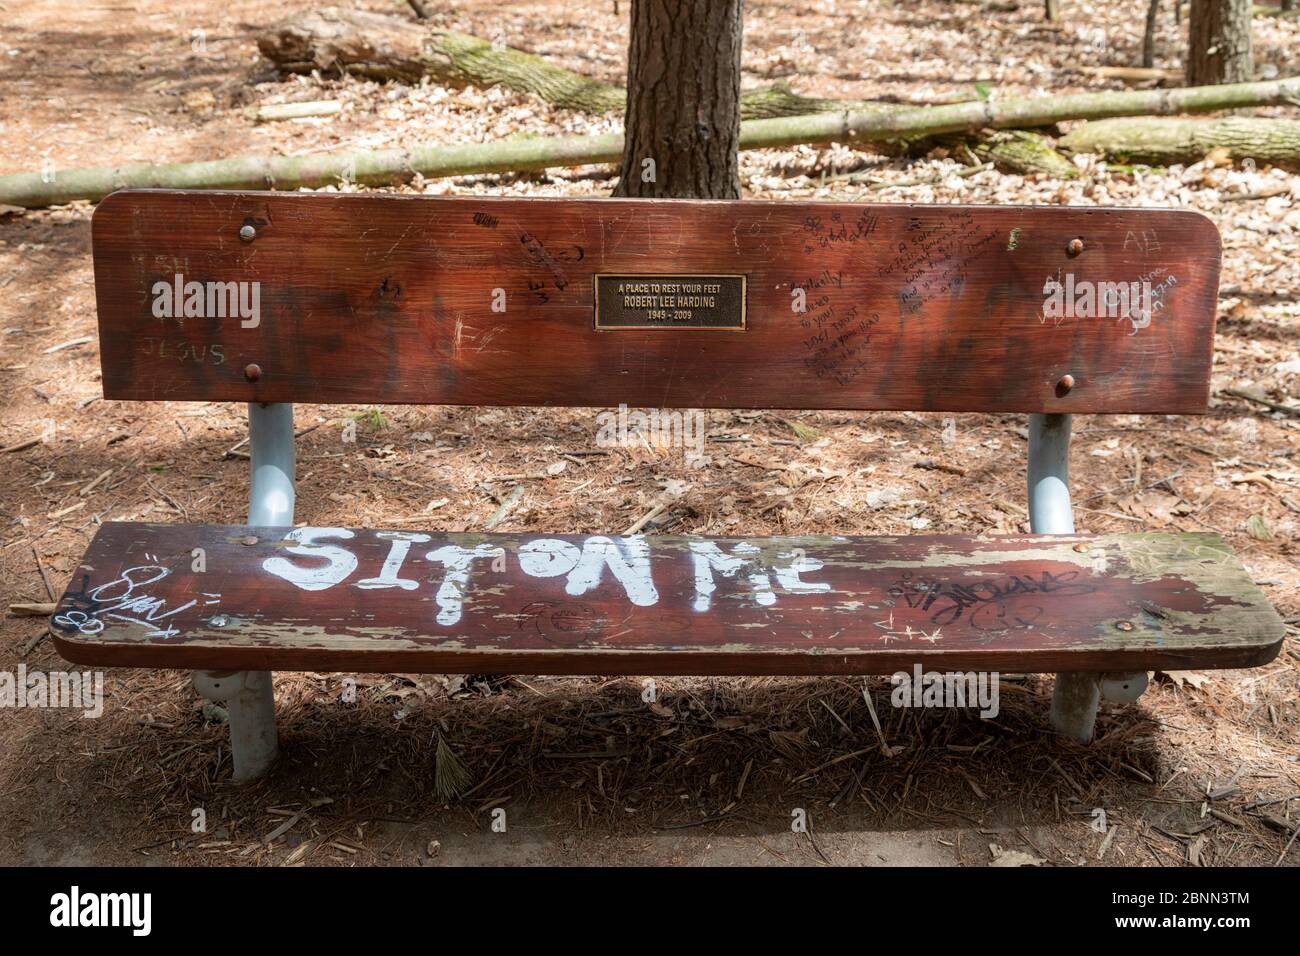 Washington Township, Michigan - A bench with instructions on how to use it along a hiking trail in Stony Creek Metropark. Stock Photo